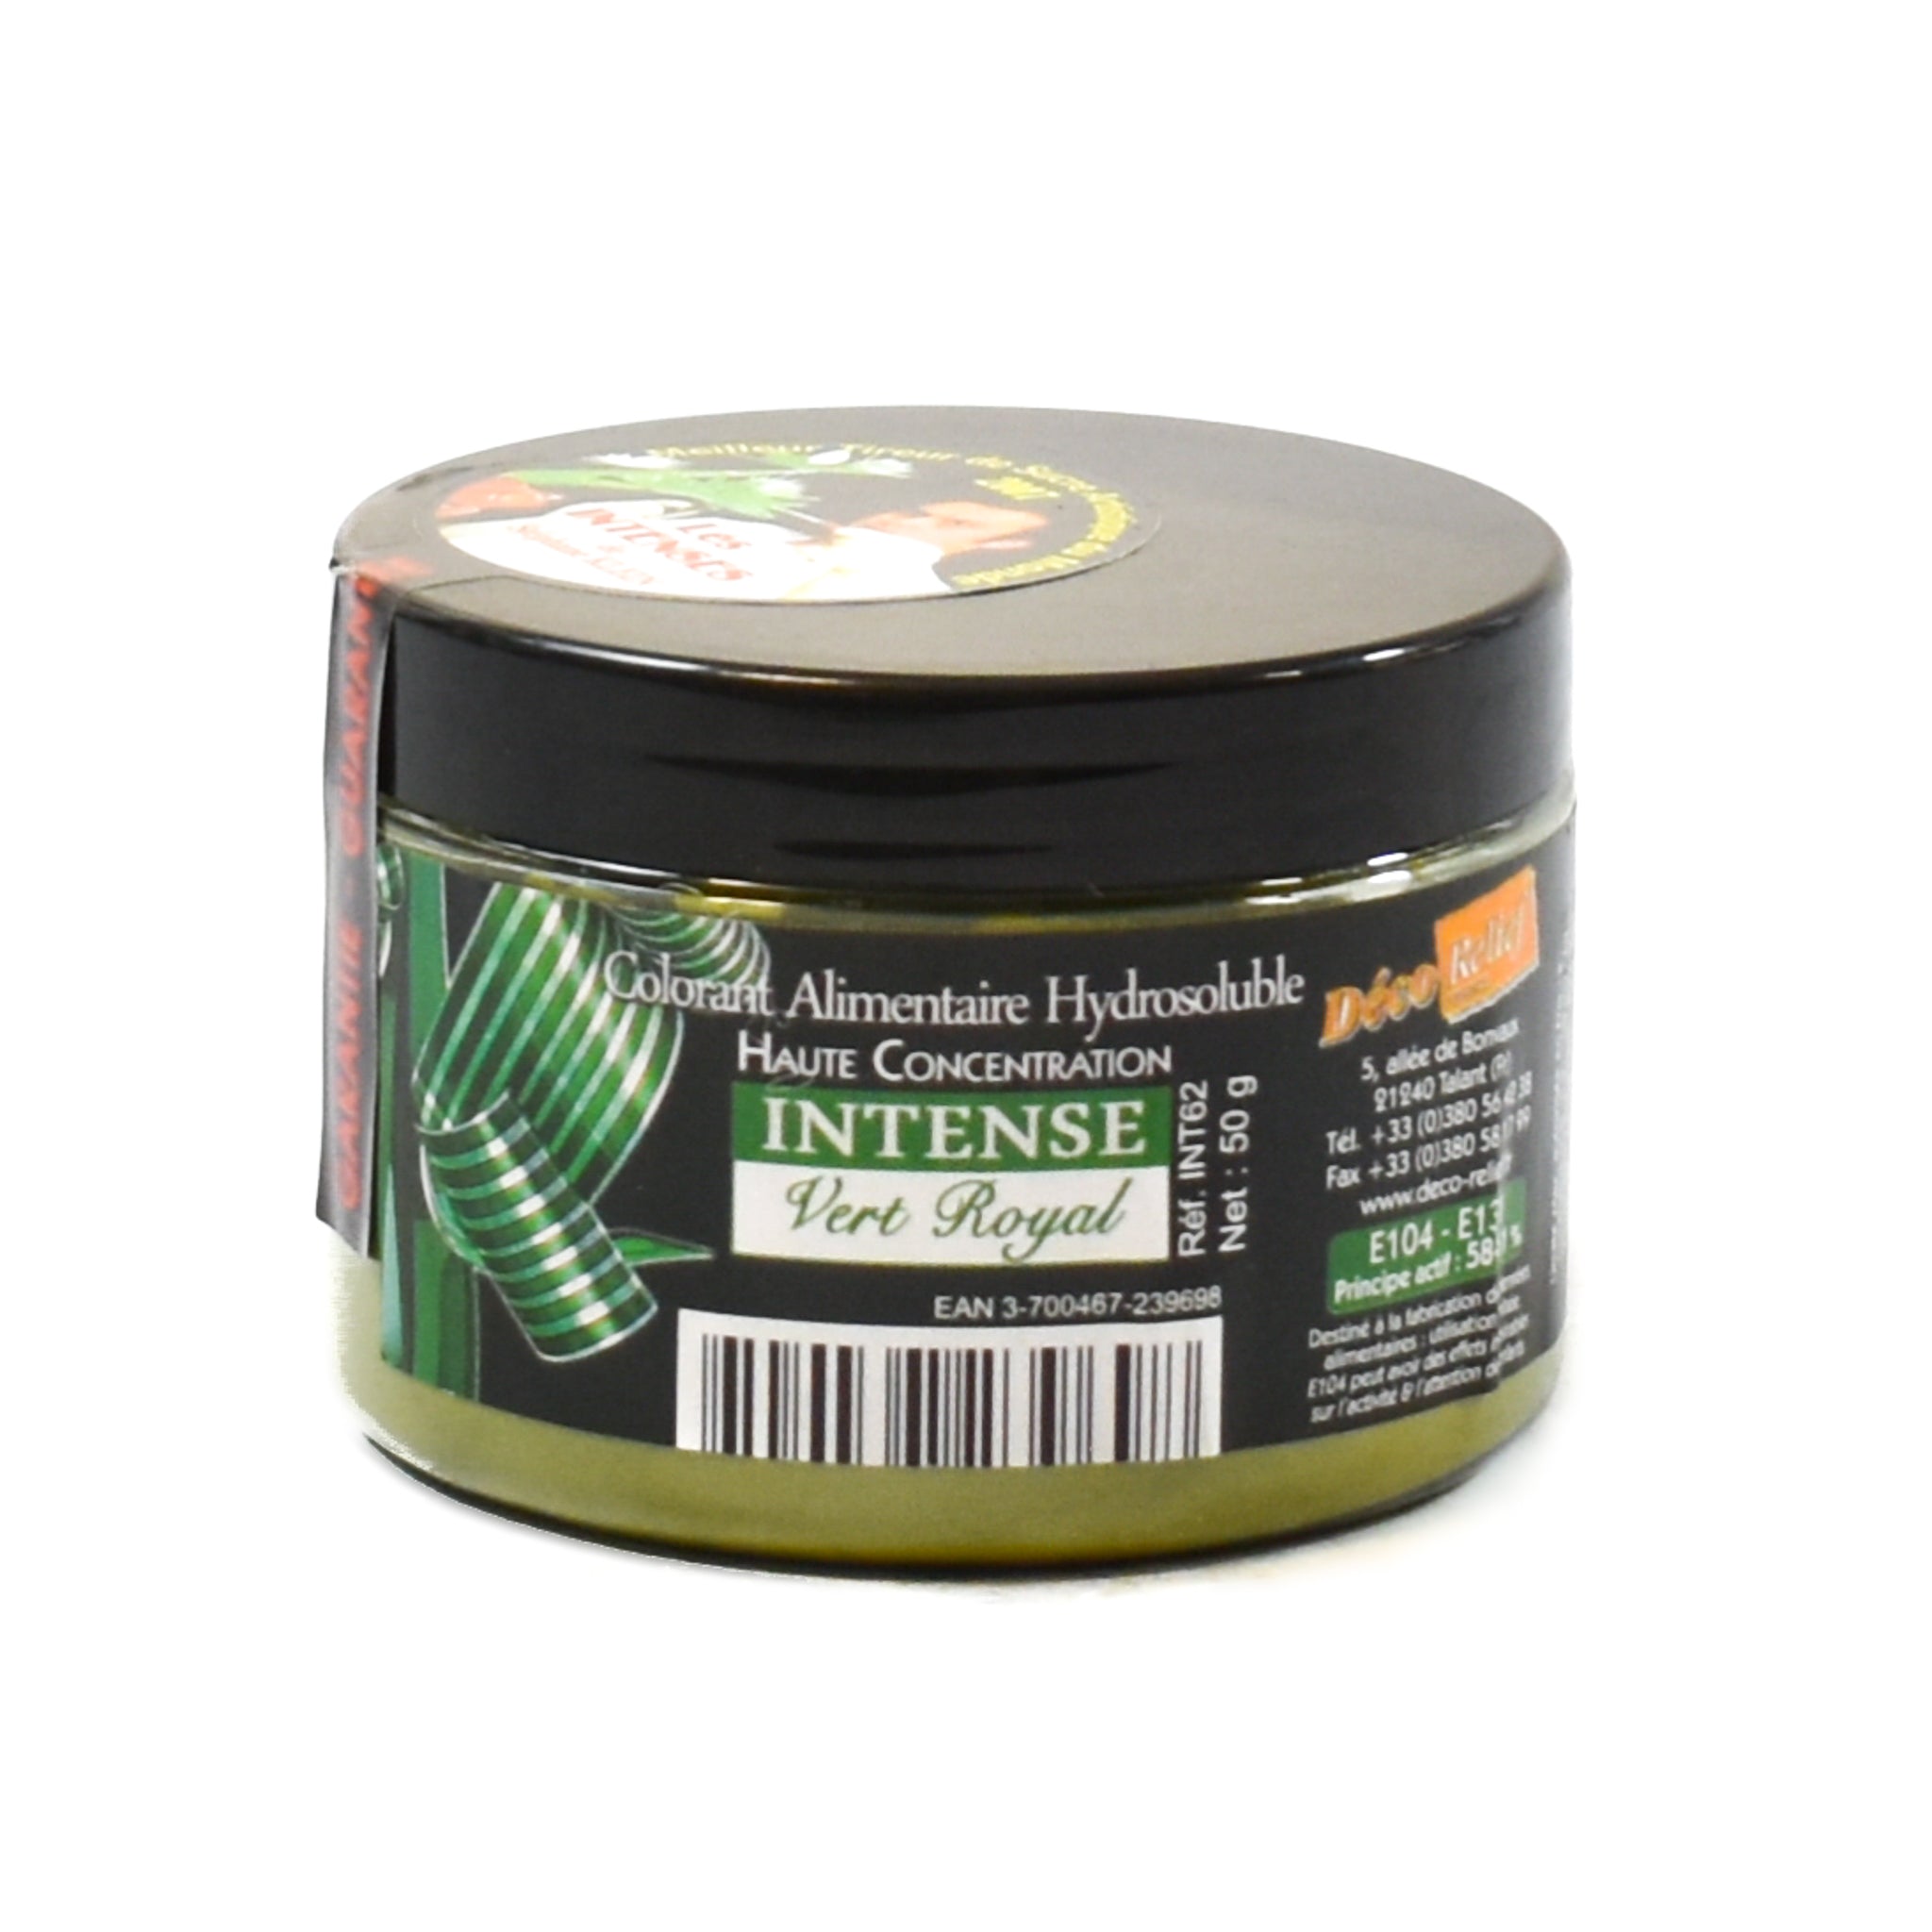 Deco Relief Intense Green Food Colour, 50g